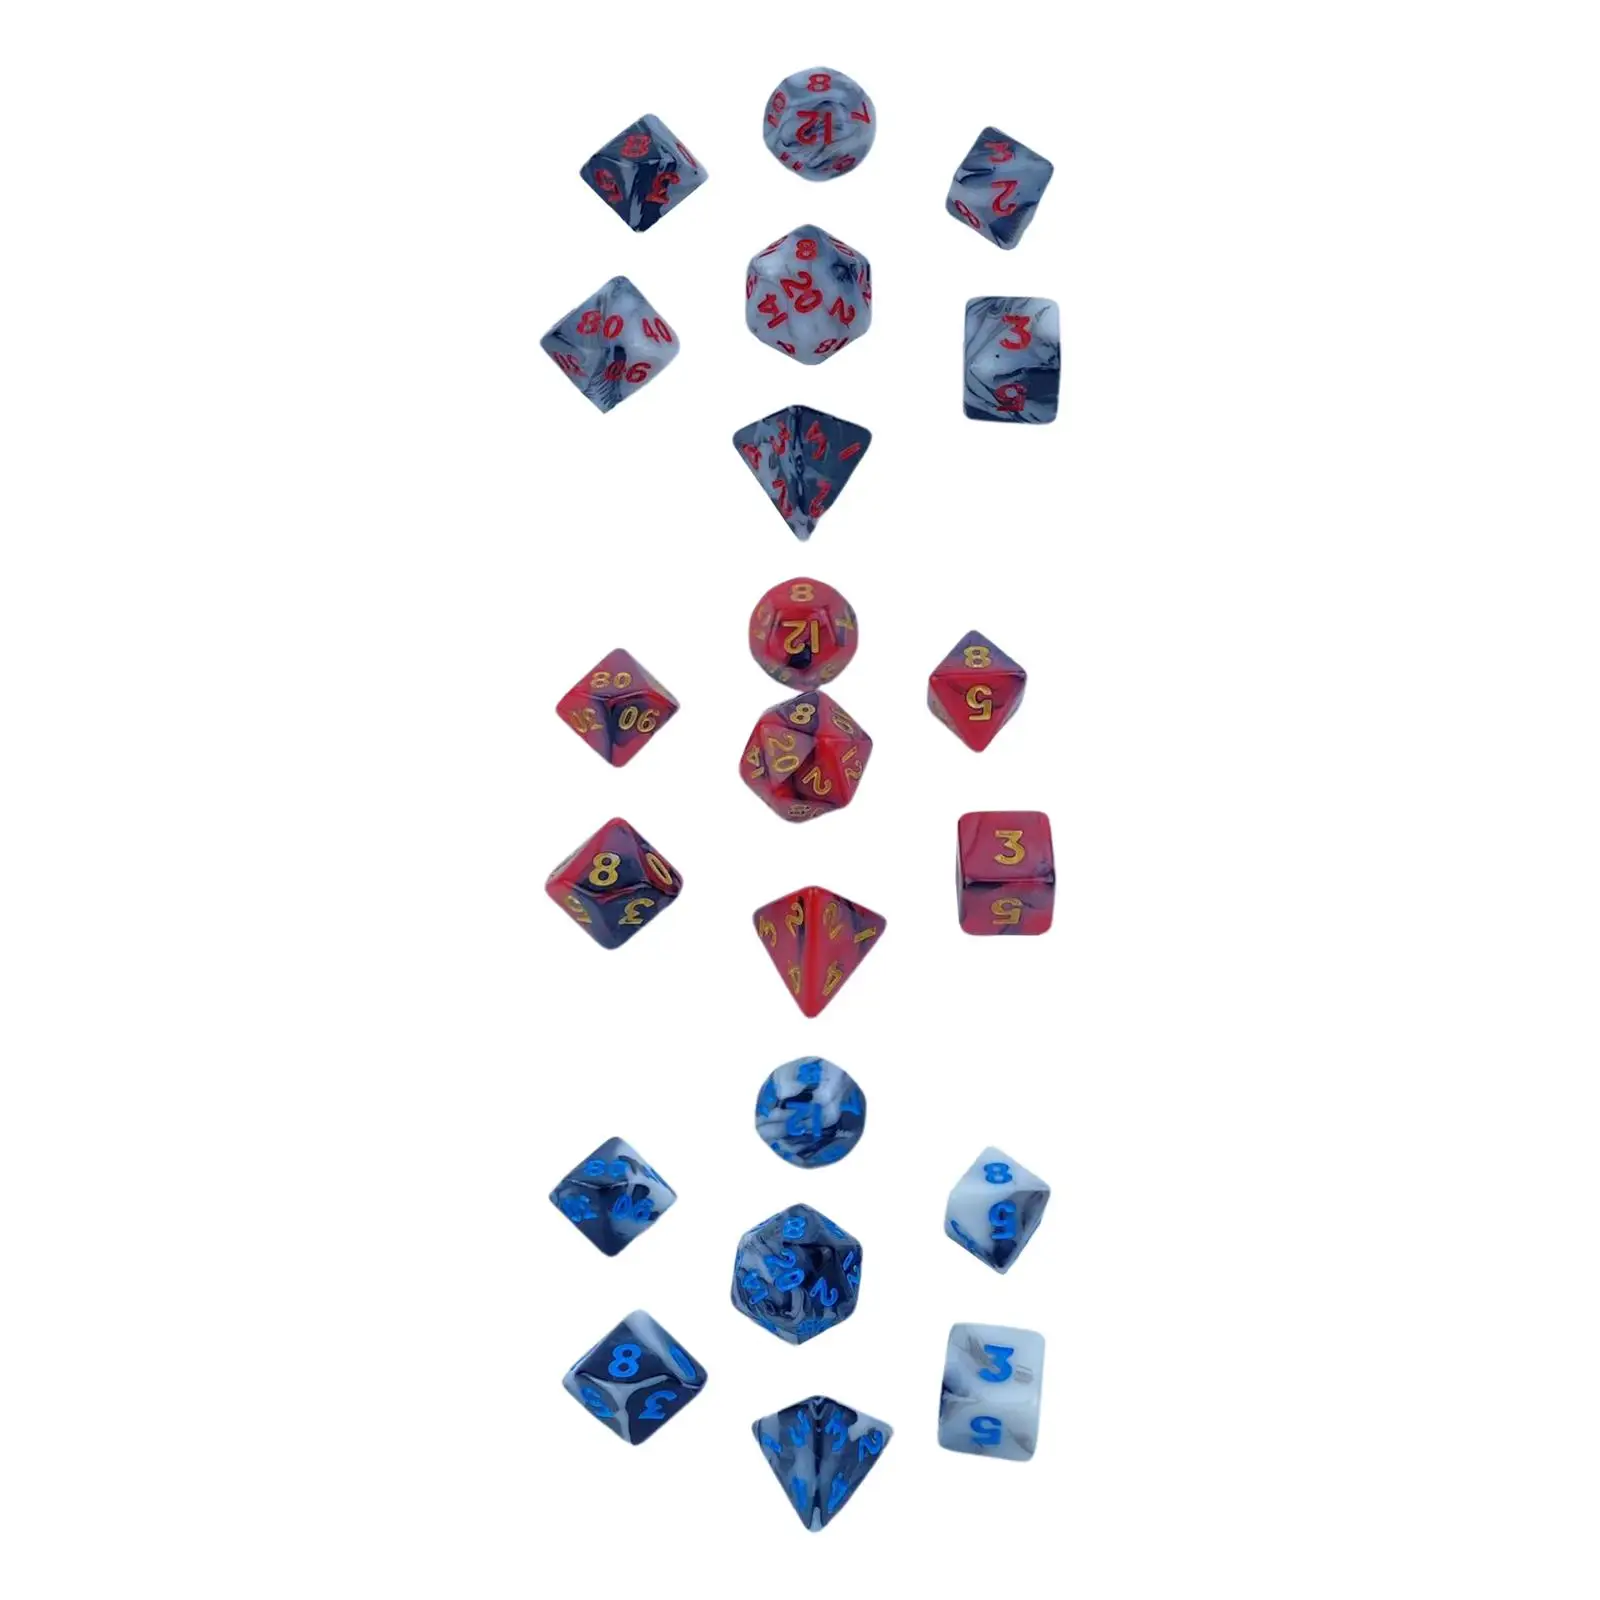 7 Pieces Acrylic Polyhedral Dices Entertainment Toy D6 D8 D10 D12 D20 for Table